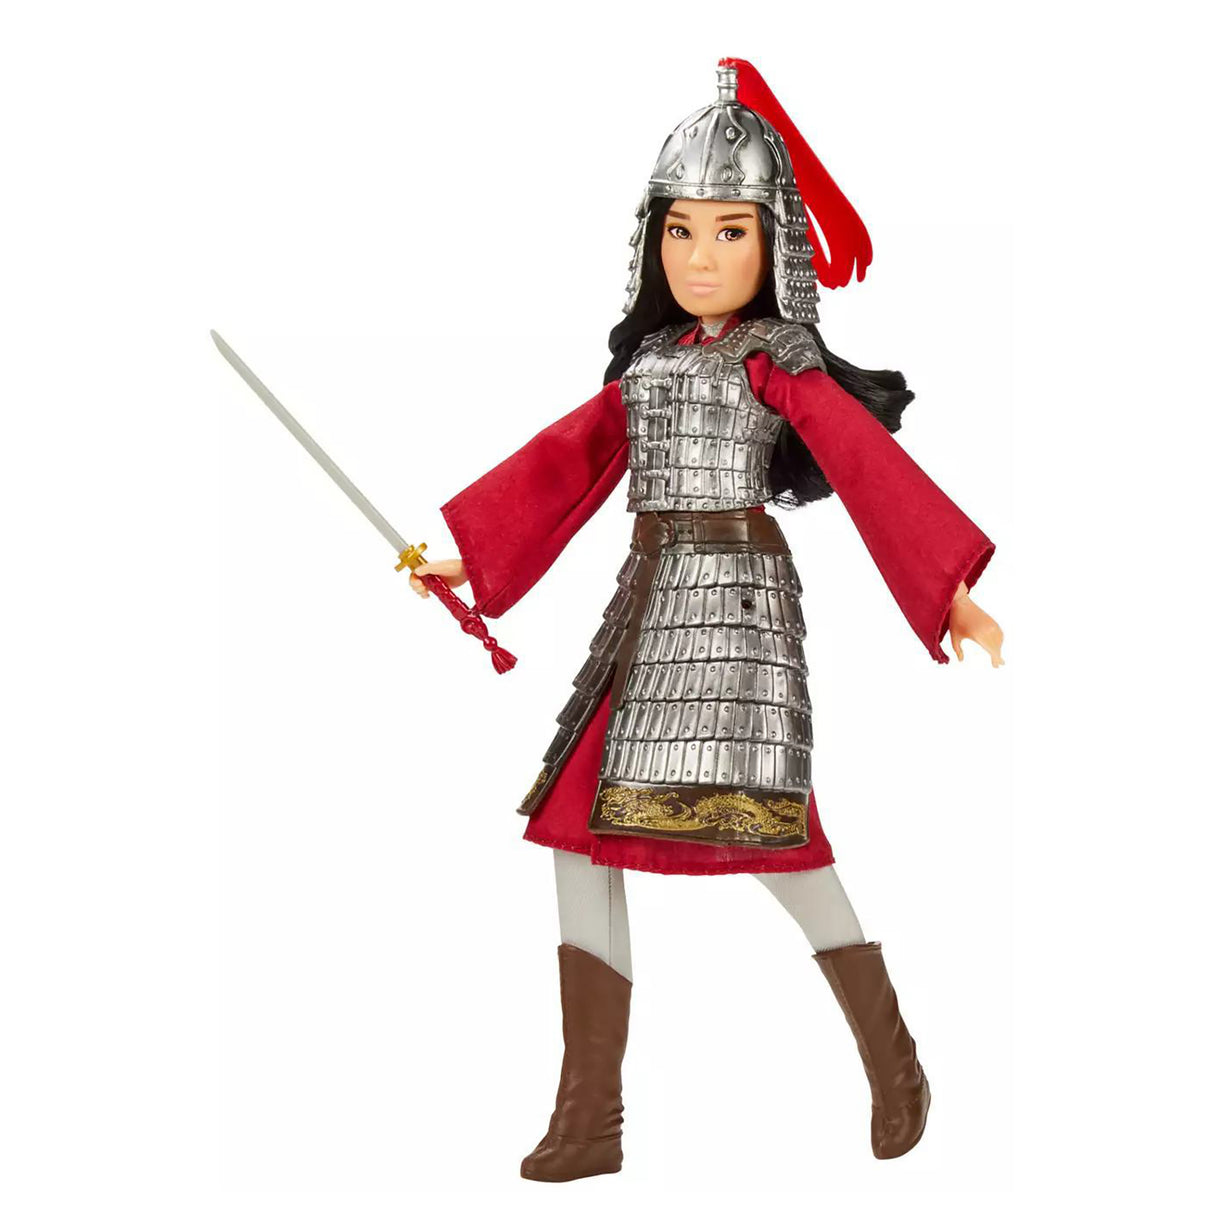 Disney Mulan - Mulan and Xianniang Dolls with Accessories